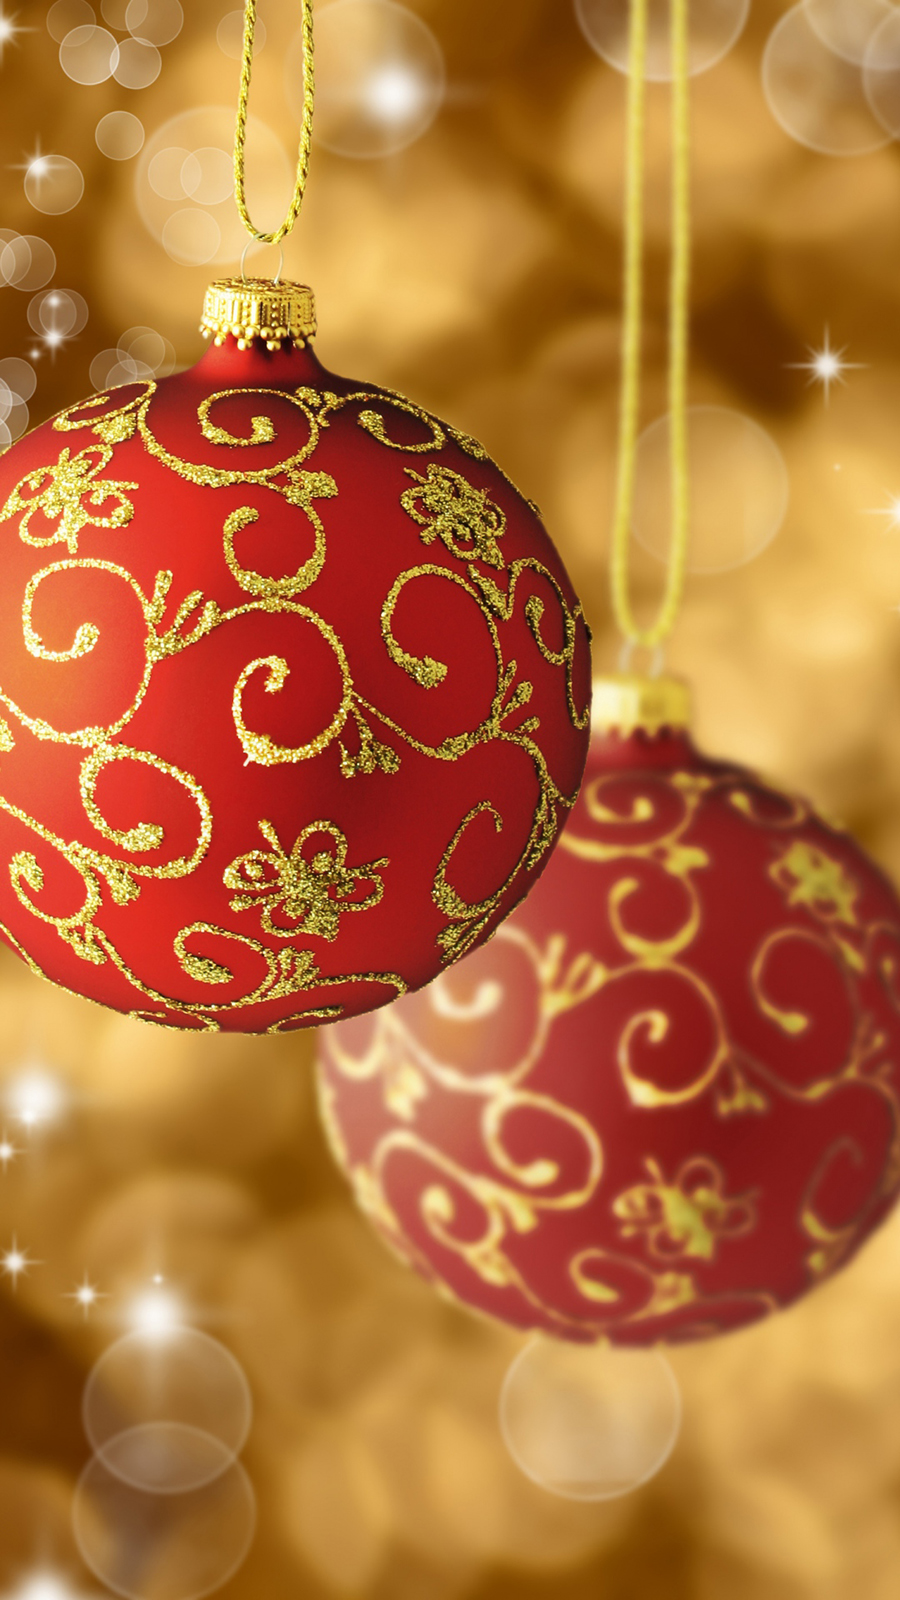 Red Gold Christmas Balls Tree Decorations Android Wallpaper